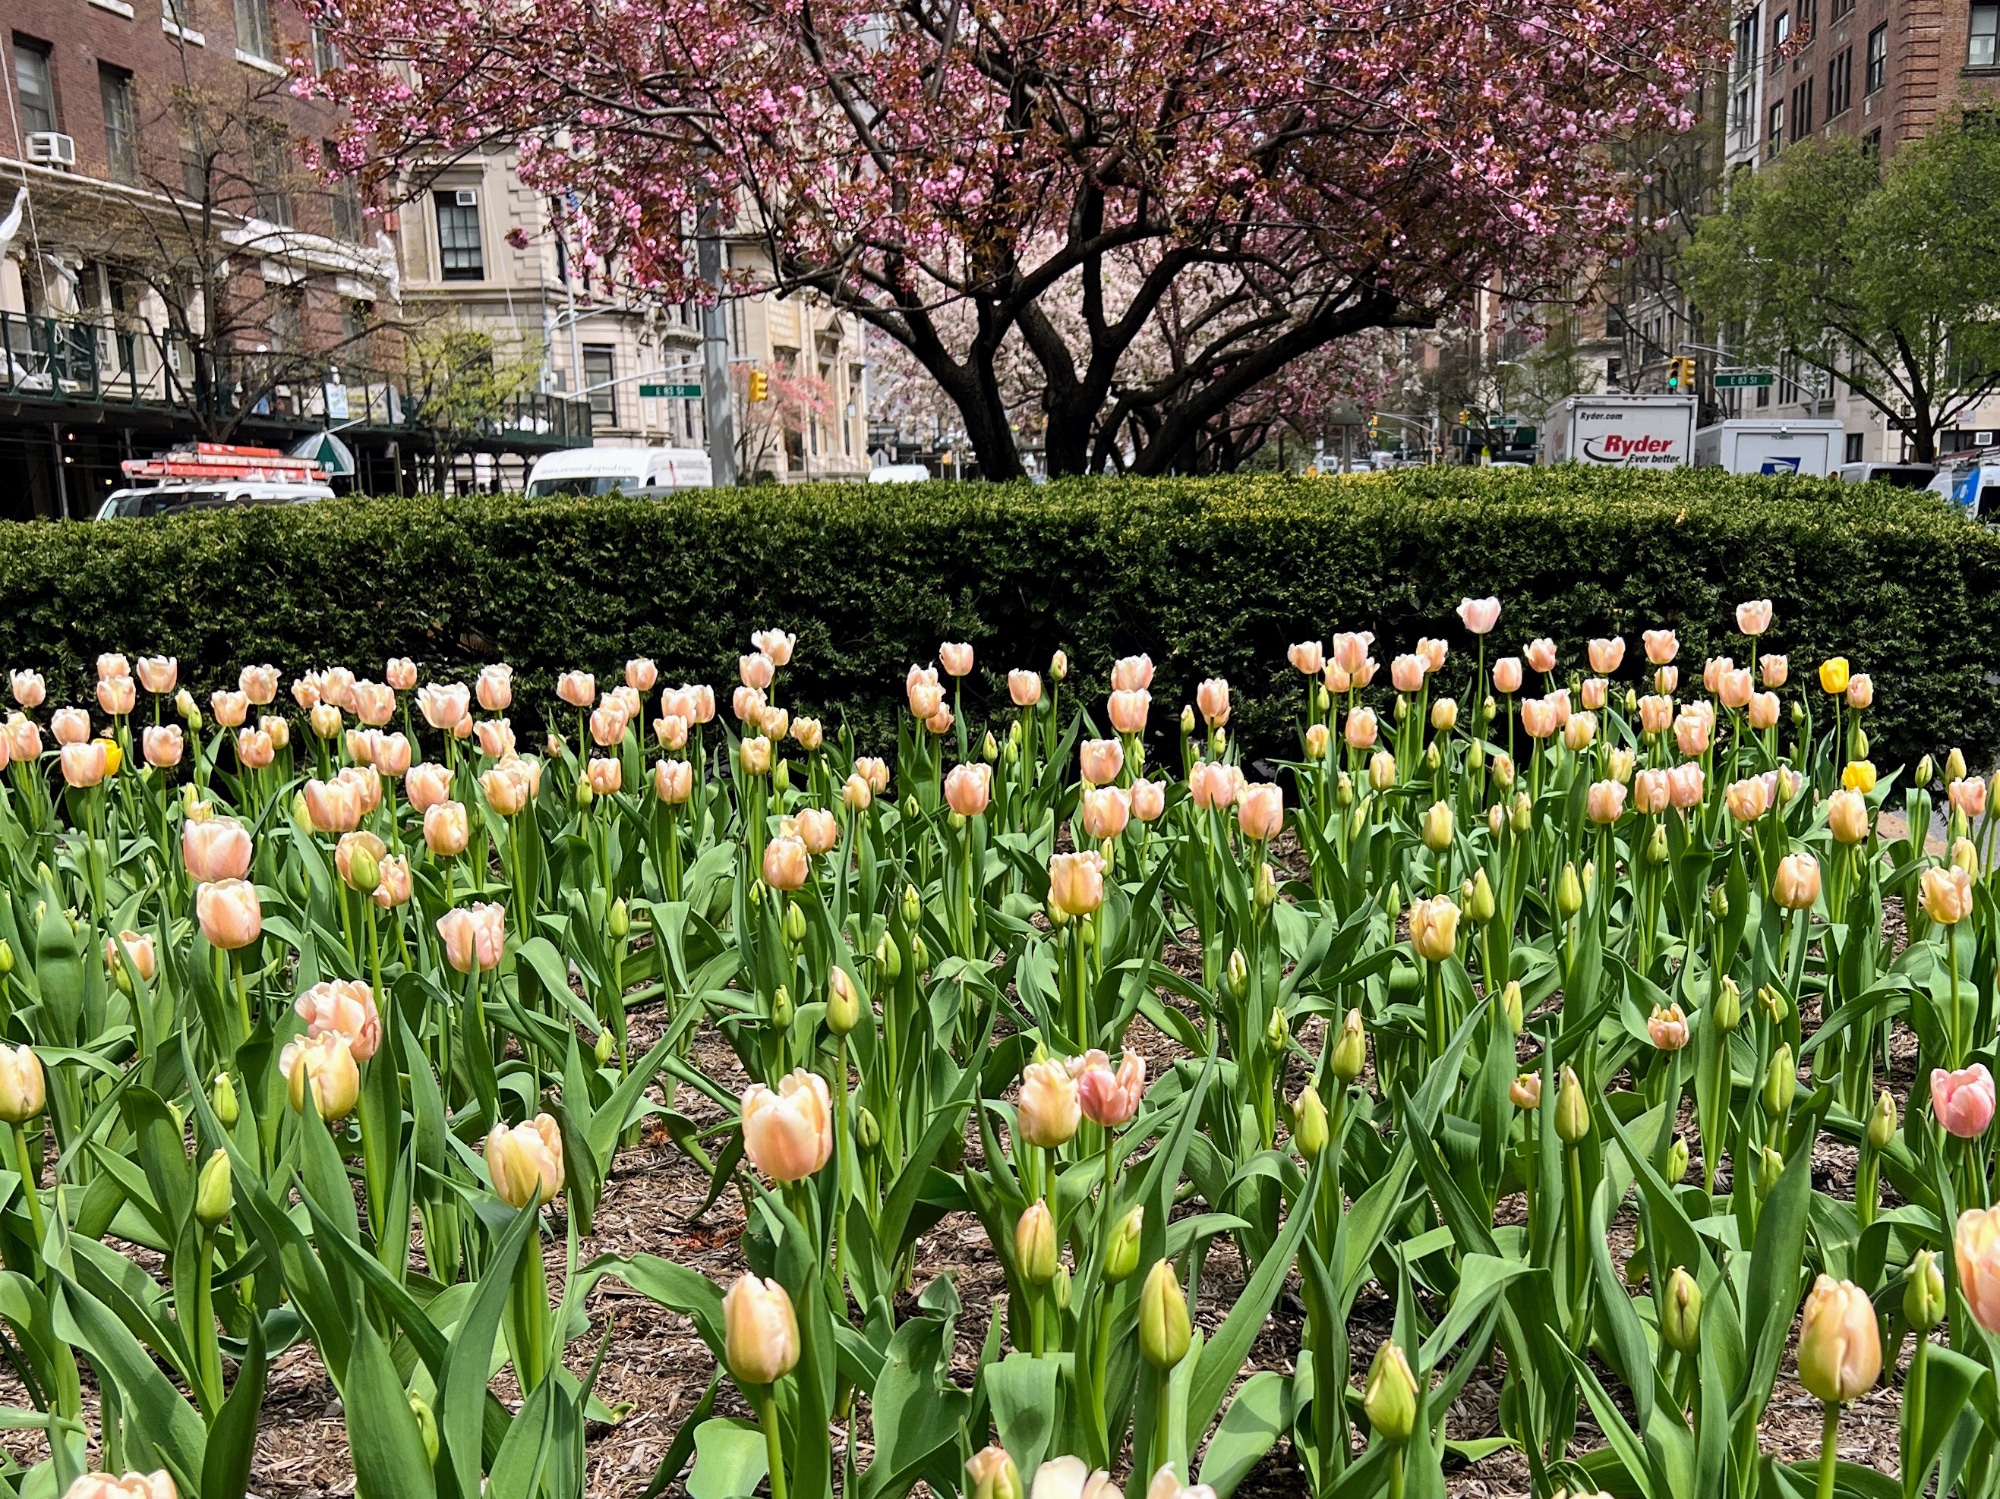 The annual Park Avenue Tulip Dig begins Monday, May 23rd